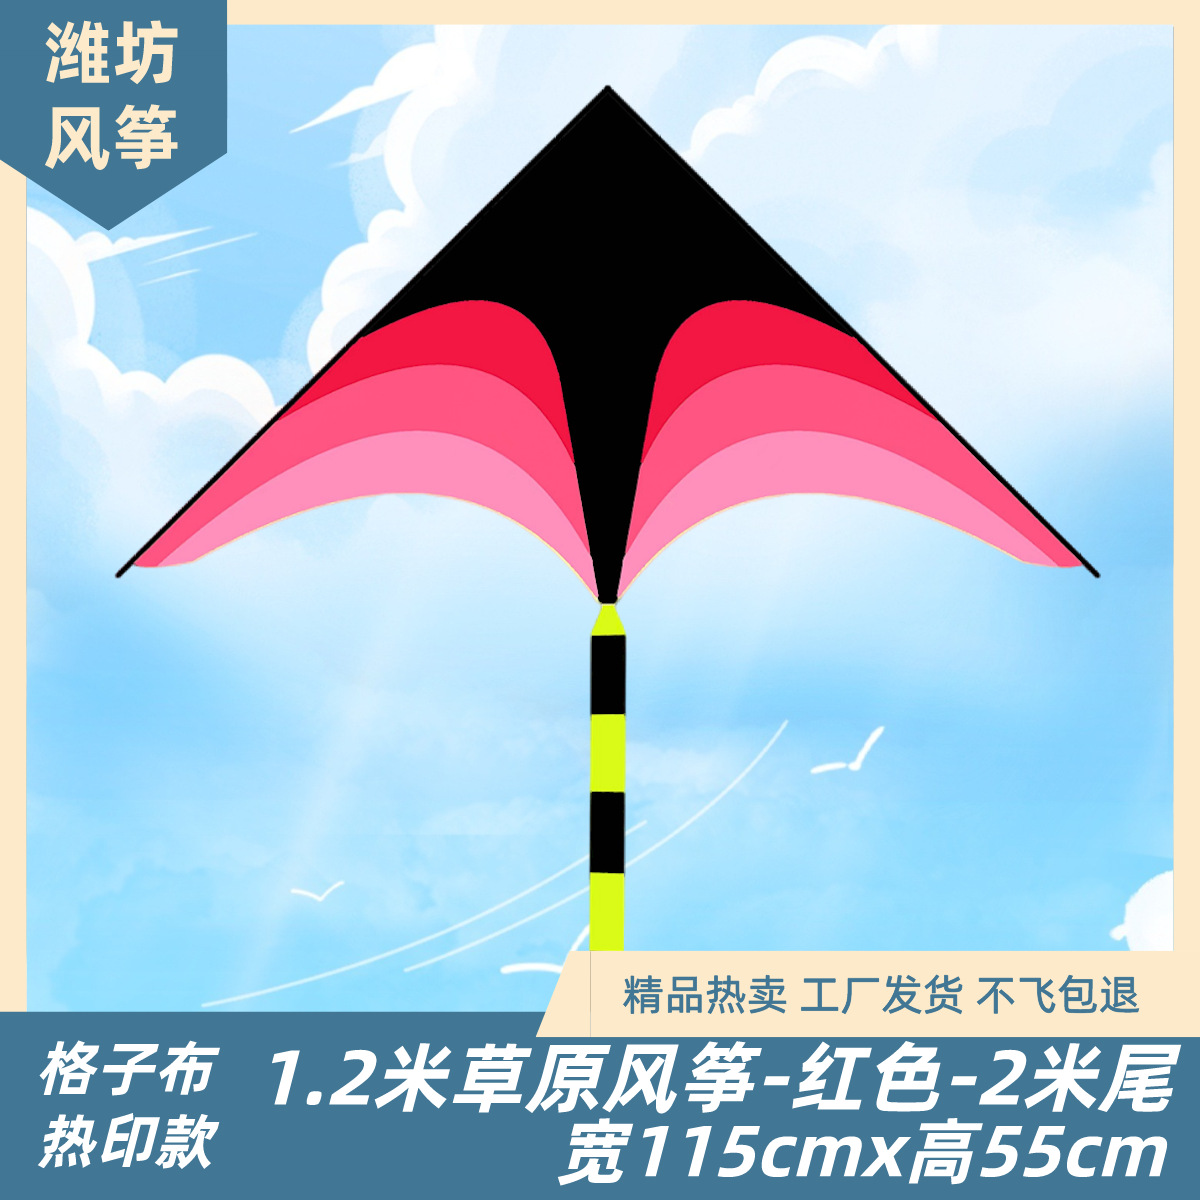 Weifang Kite New Prairie Kite Adult and Children Kite with Kite Line Breeze Easy to Fly Factory Wholesale